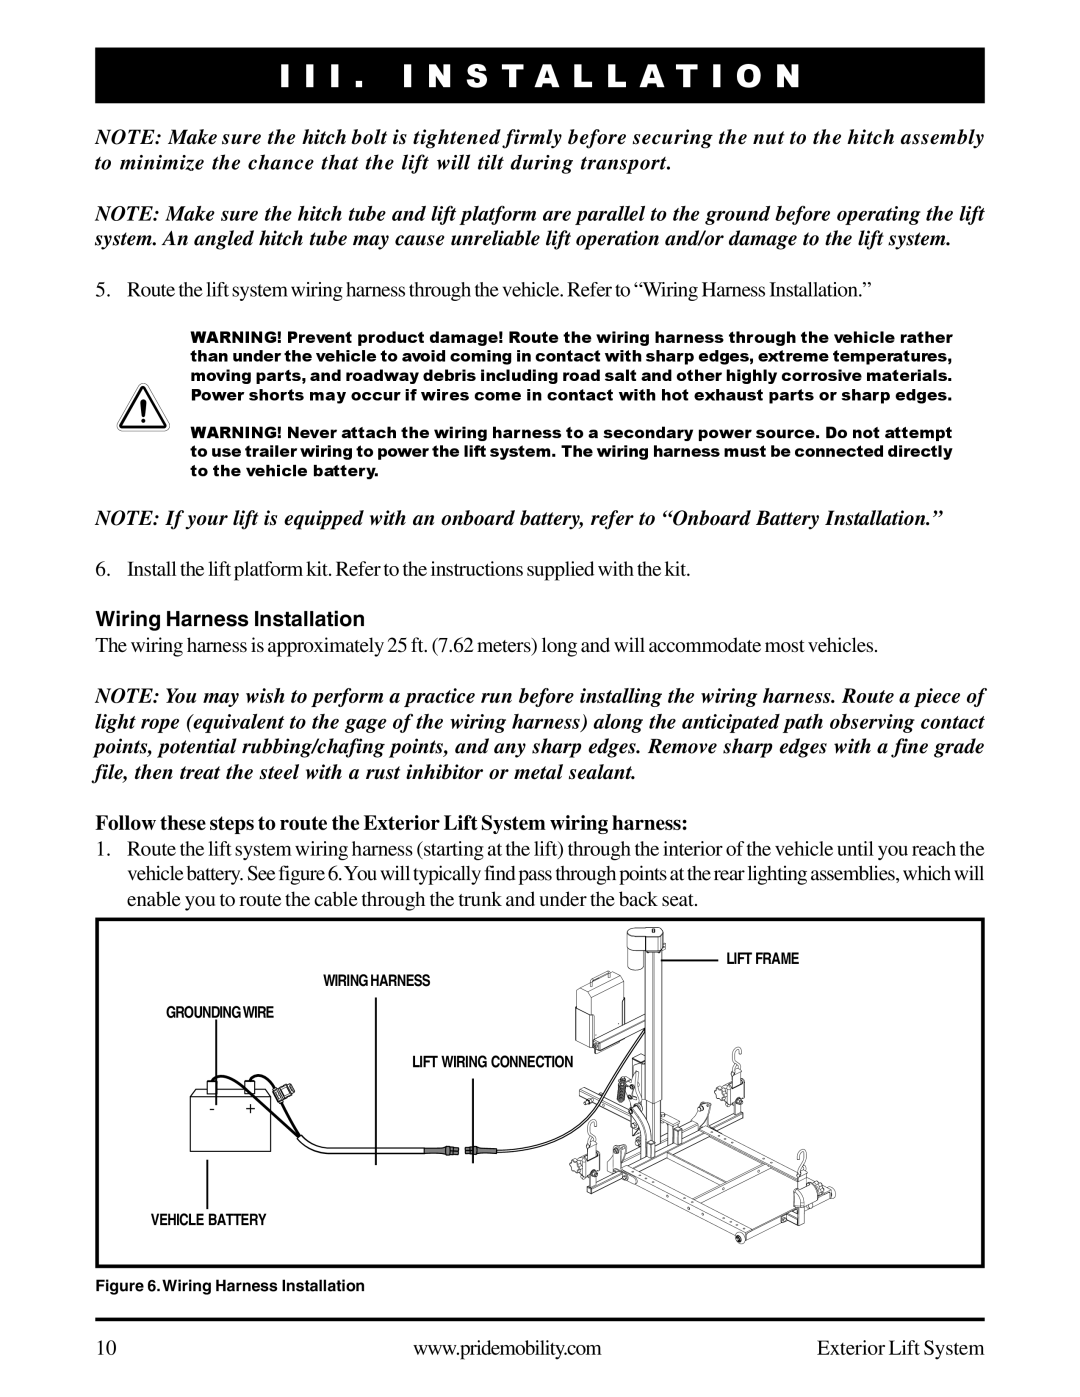 Pride Mobility Exterior Lift System manual Wiring Harness Installation, I I I . I N S T A L L A T I O N 